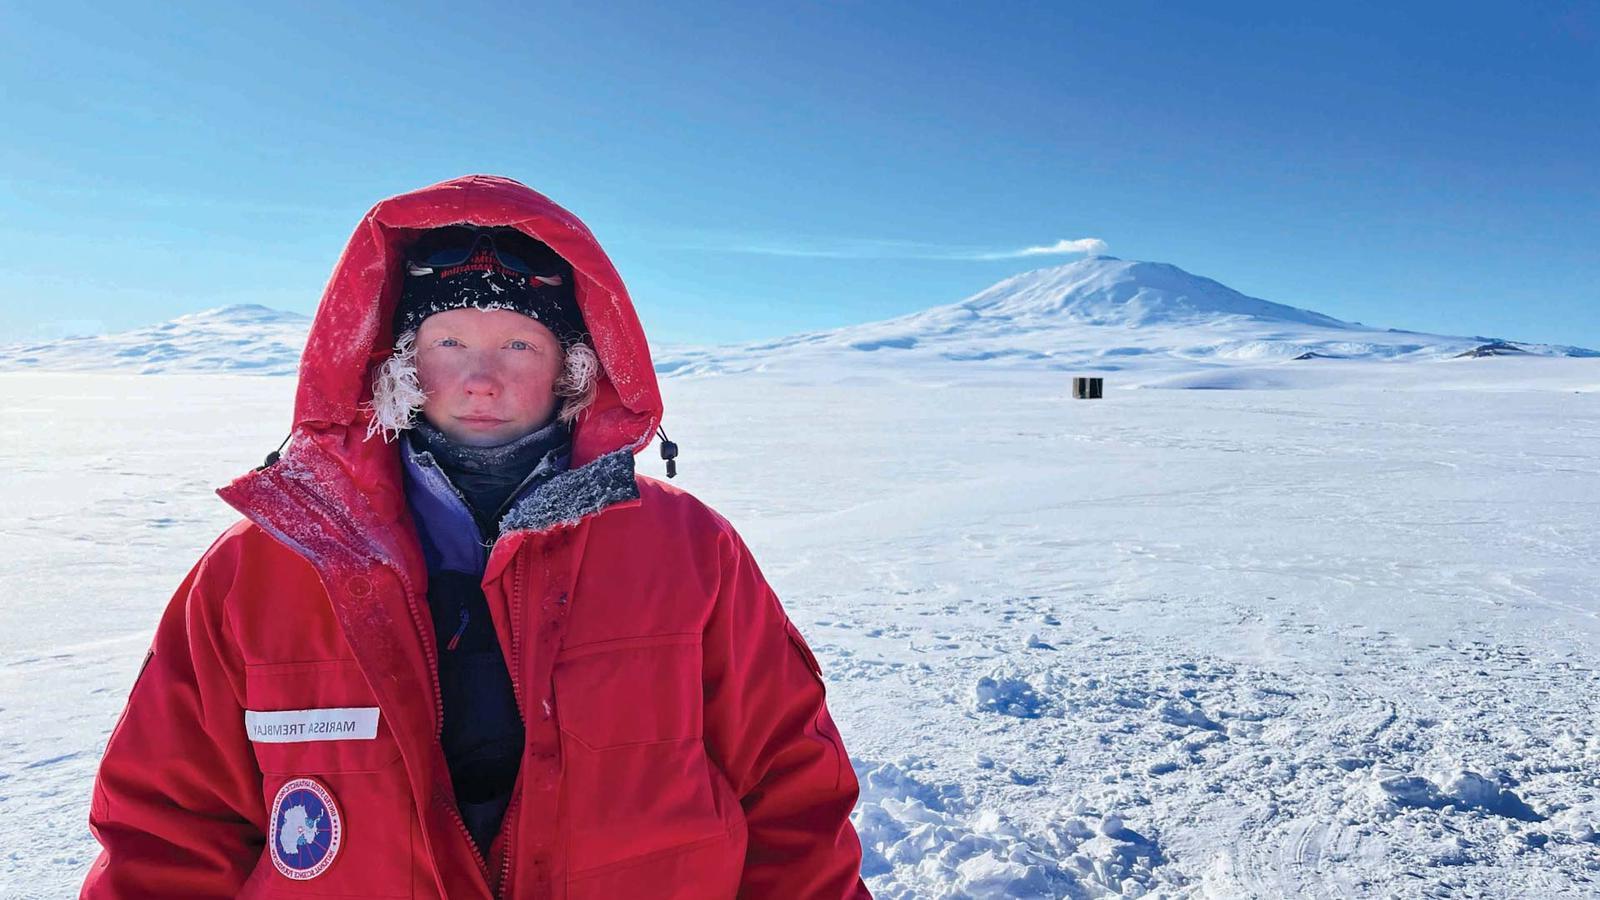 Marissa Tremblay in Antarctica. She is wearing a large red coat with the hood up.